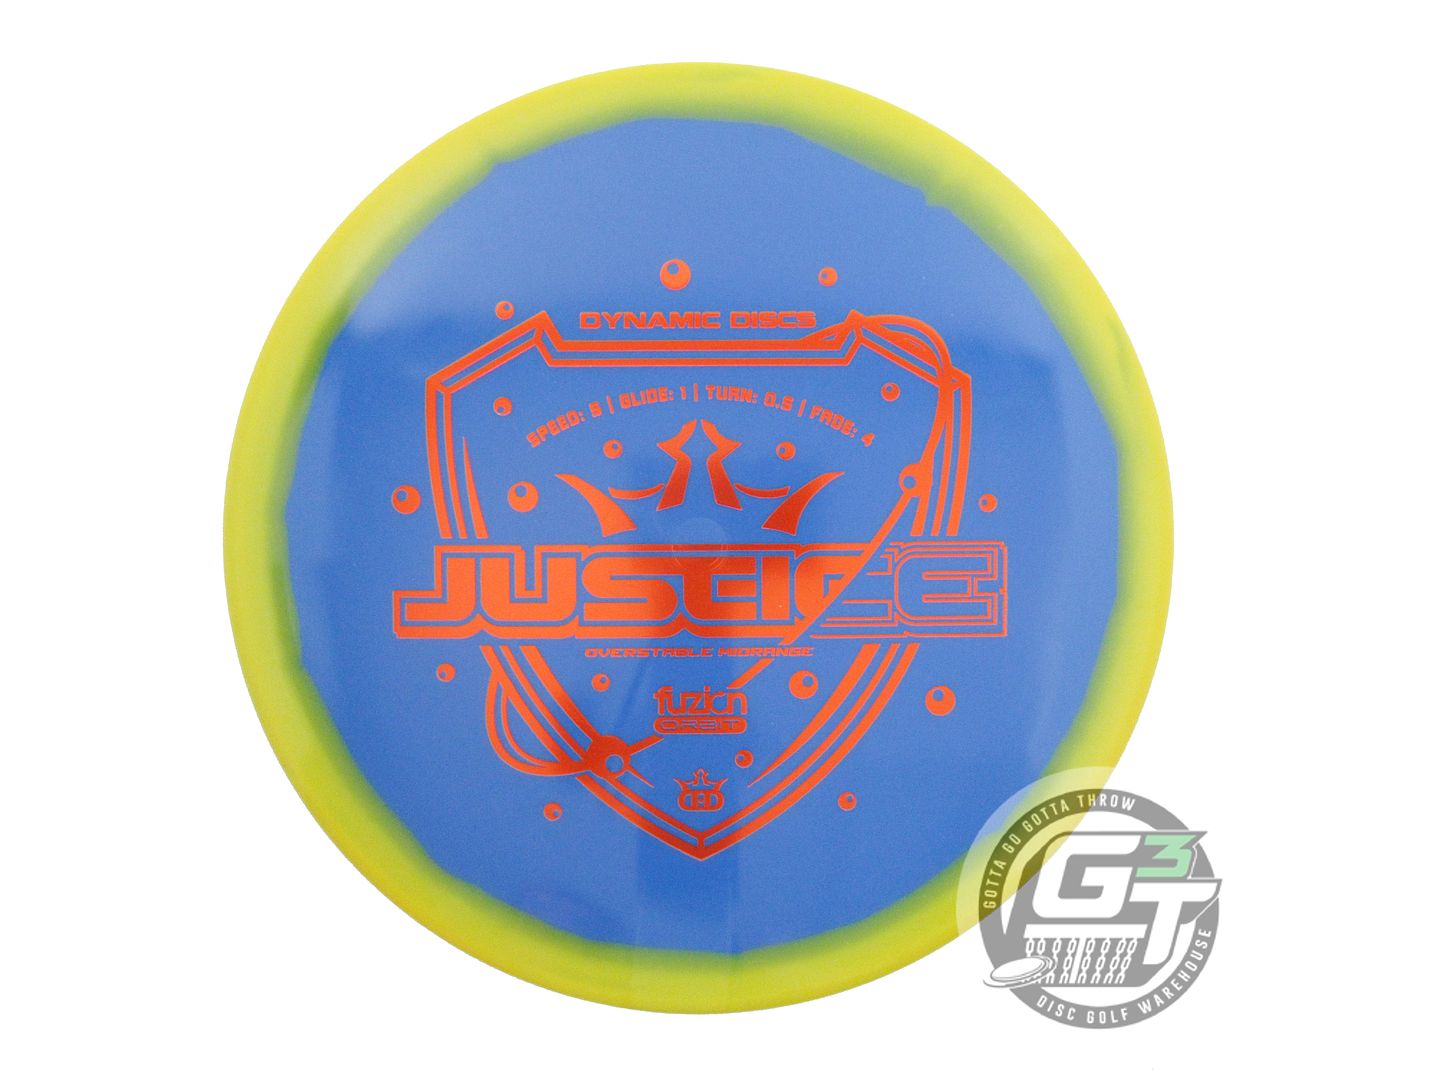 Dynamic Discs Fuzion Orbit Justice Midrange Golf Disc (Individually Listed)